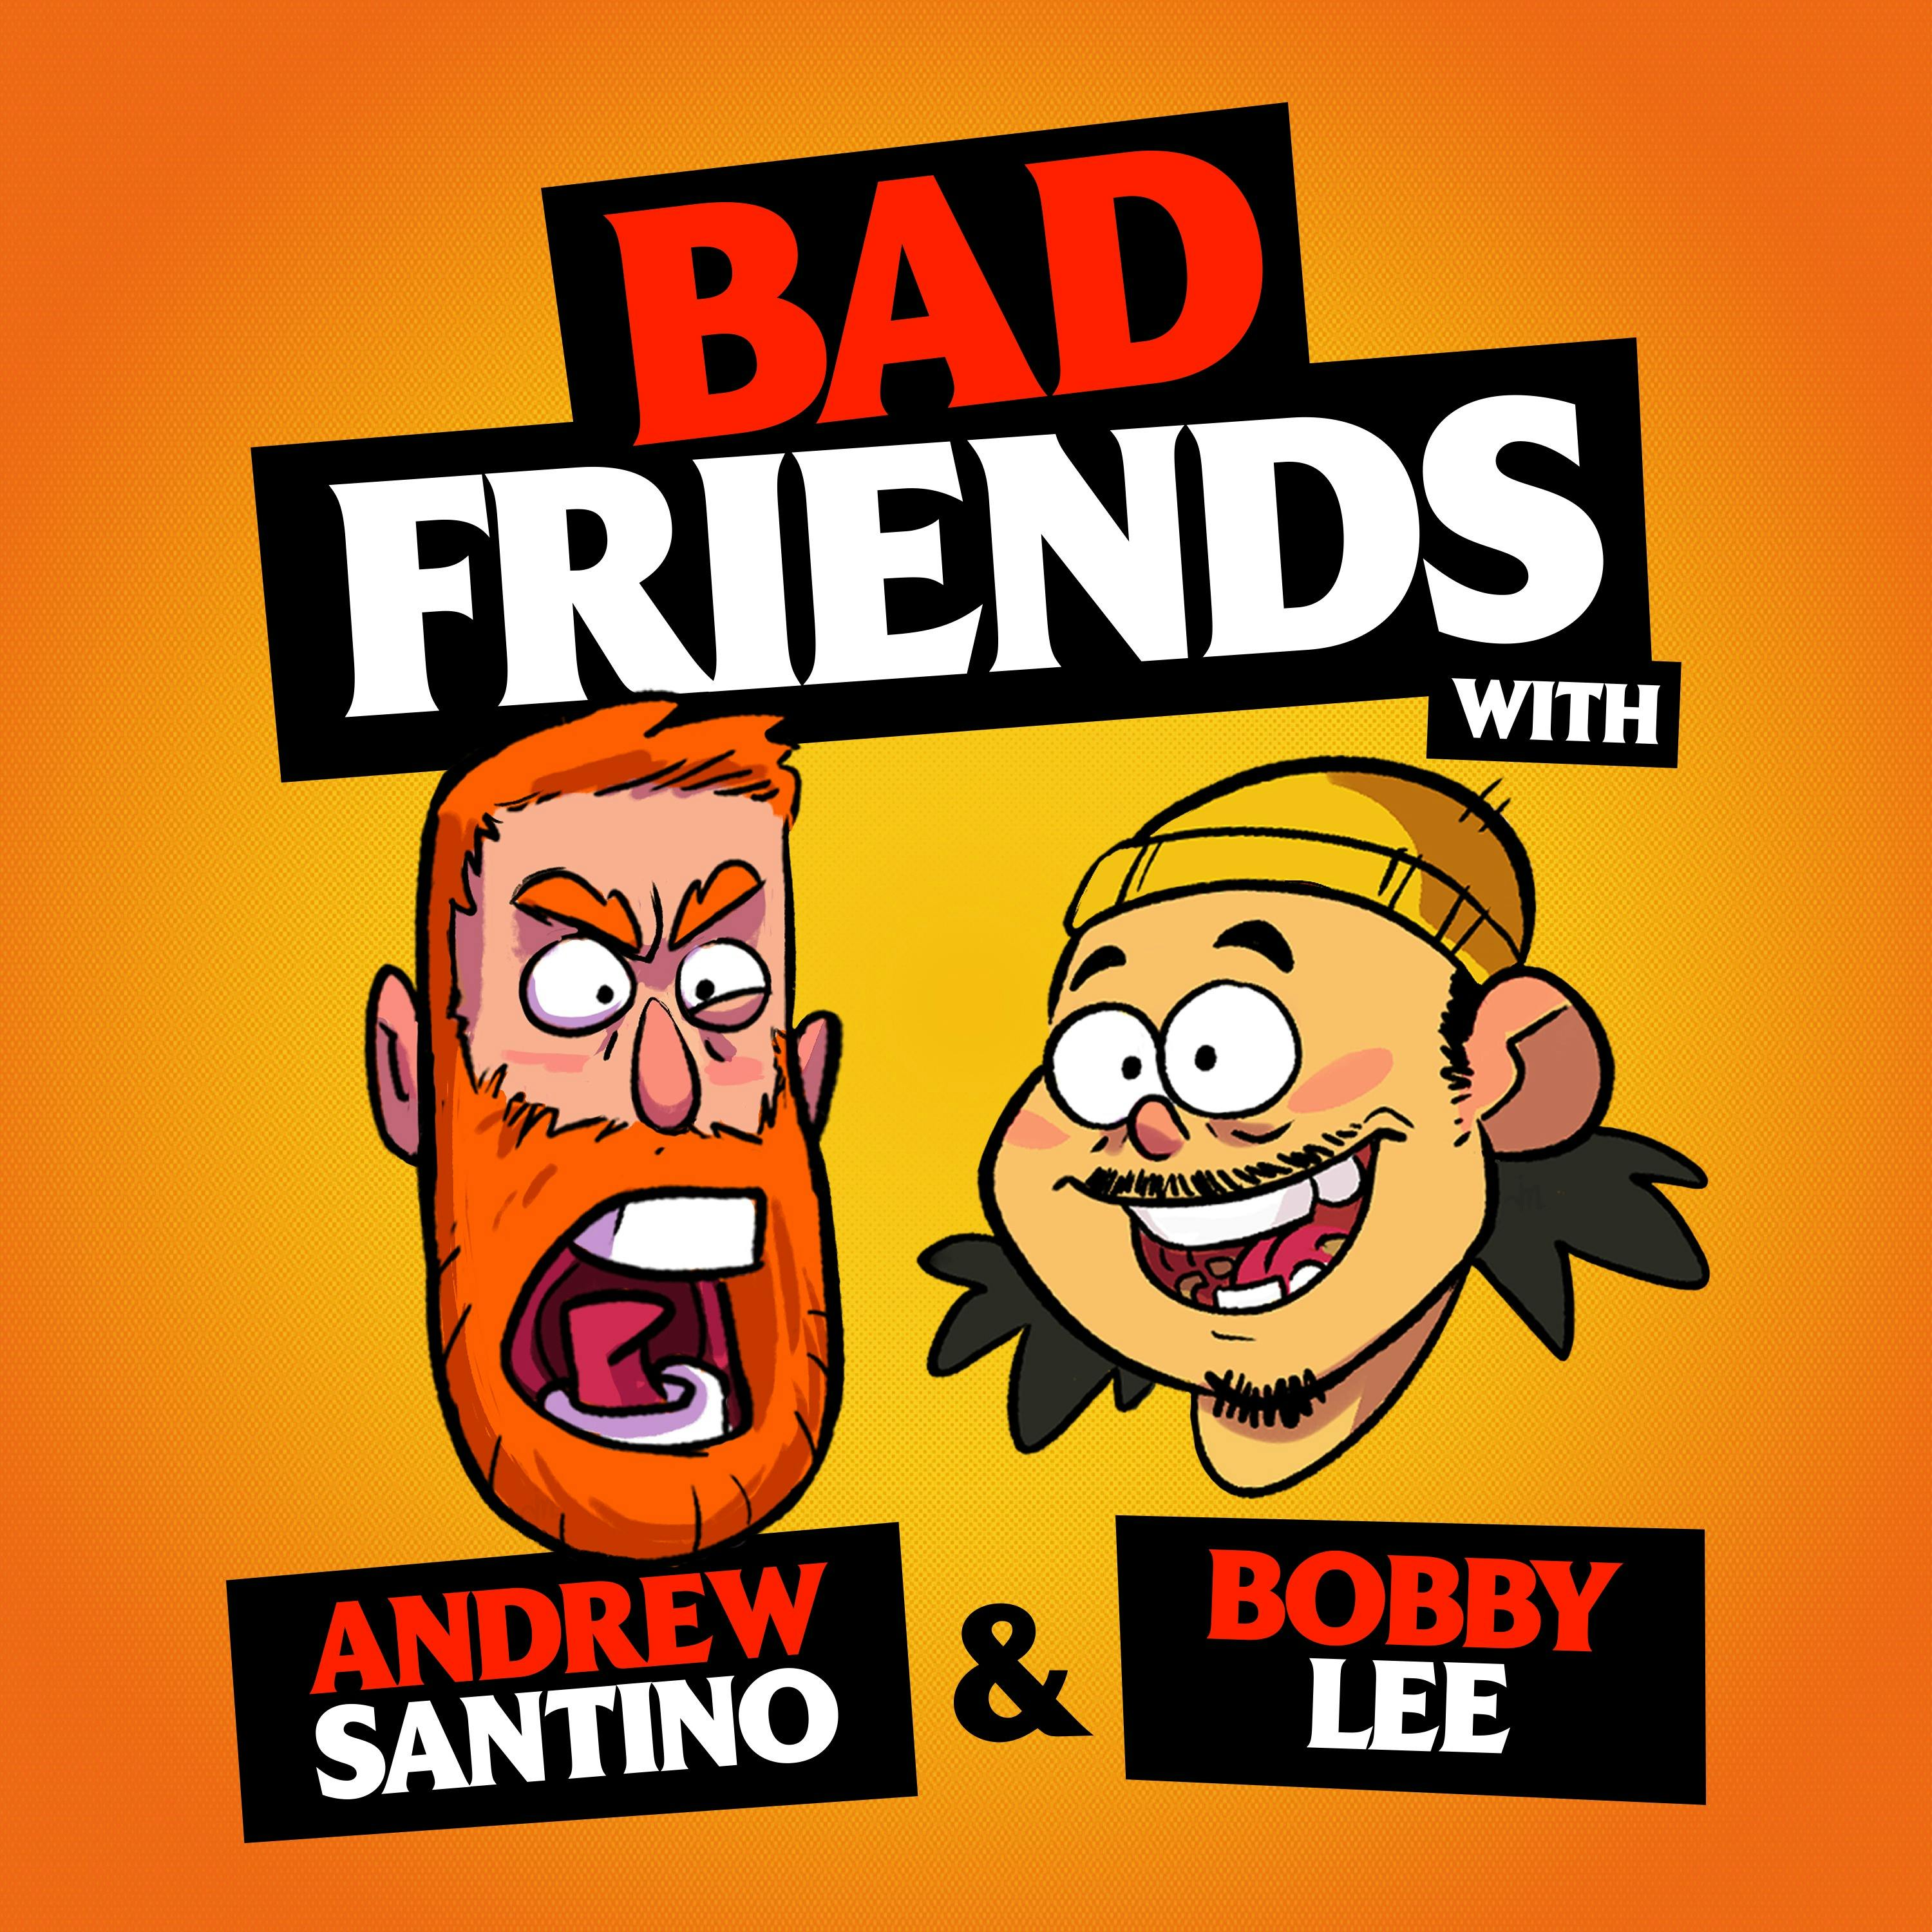 High Brow Friends by Andrew Santino and Bobby Lee